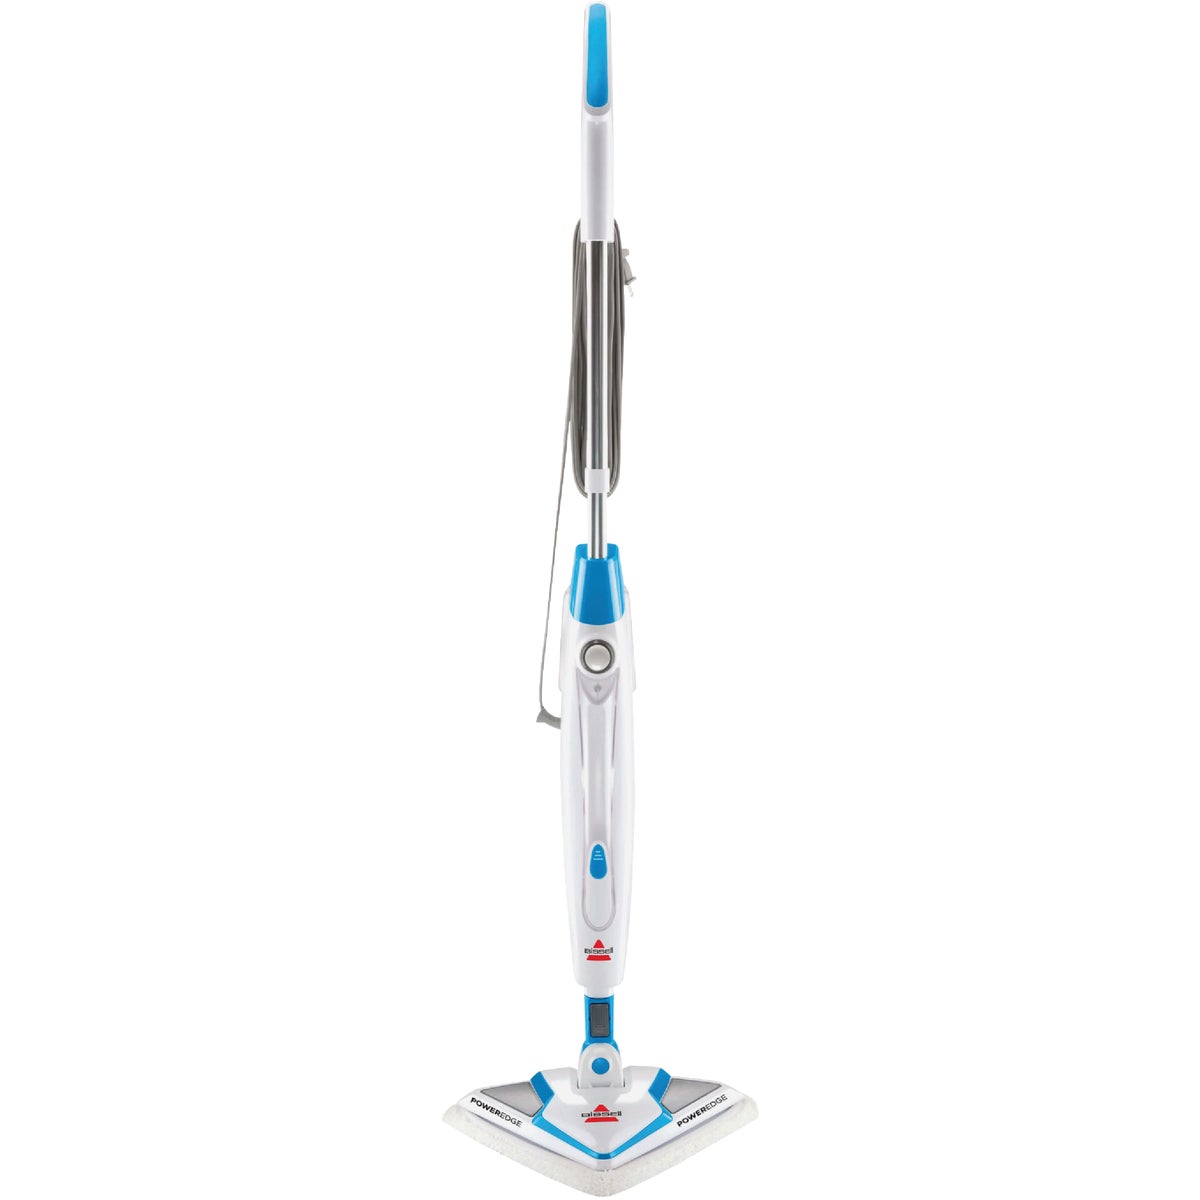 Bissell PowerEdge Lift-Off 2-in-1 Steam Mop